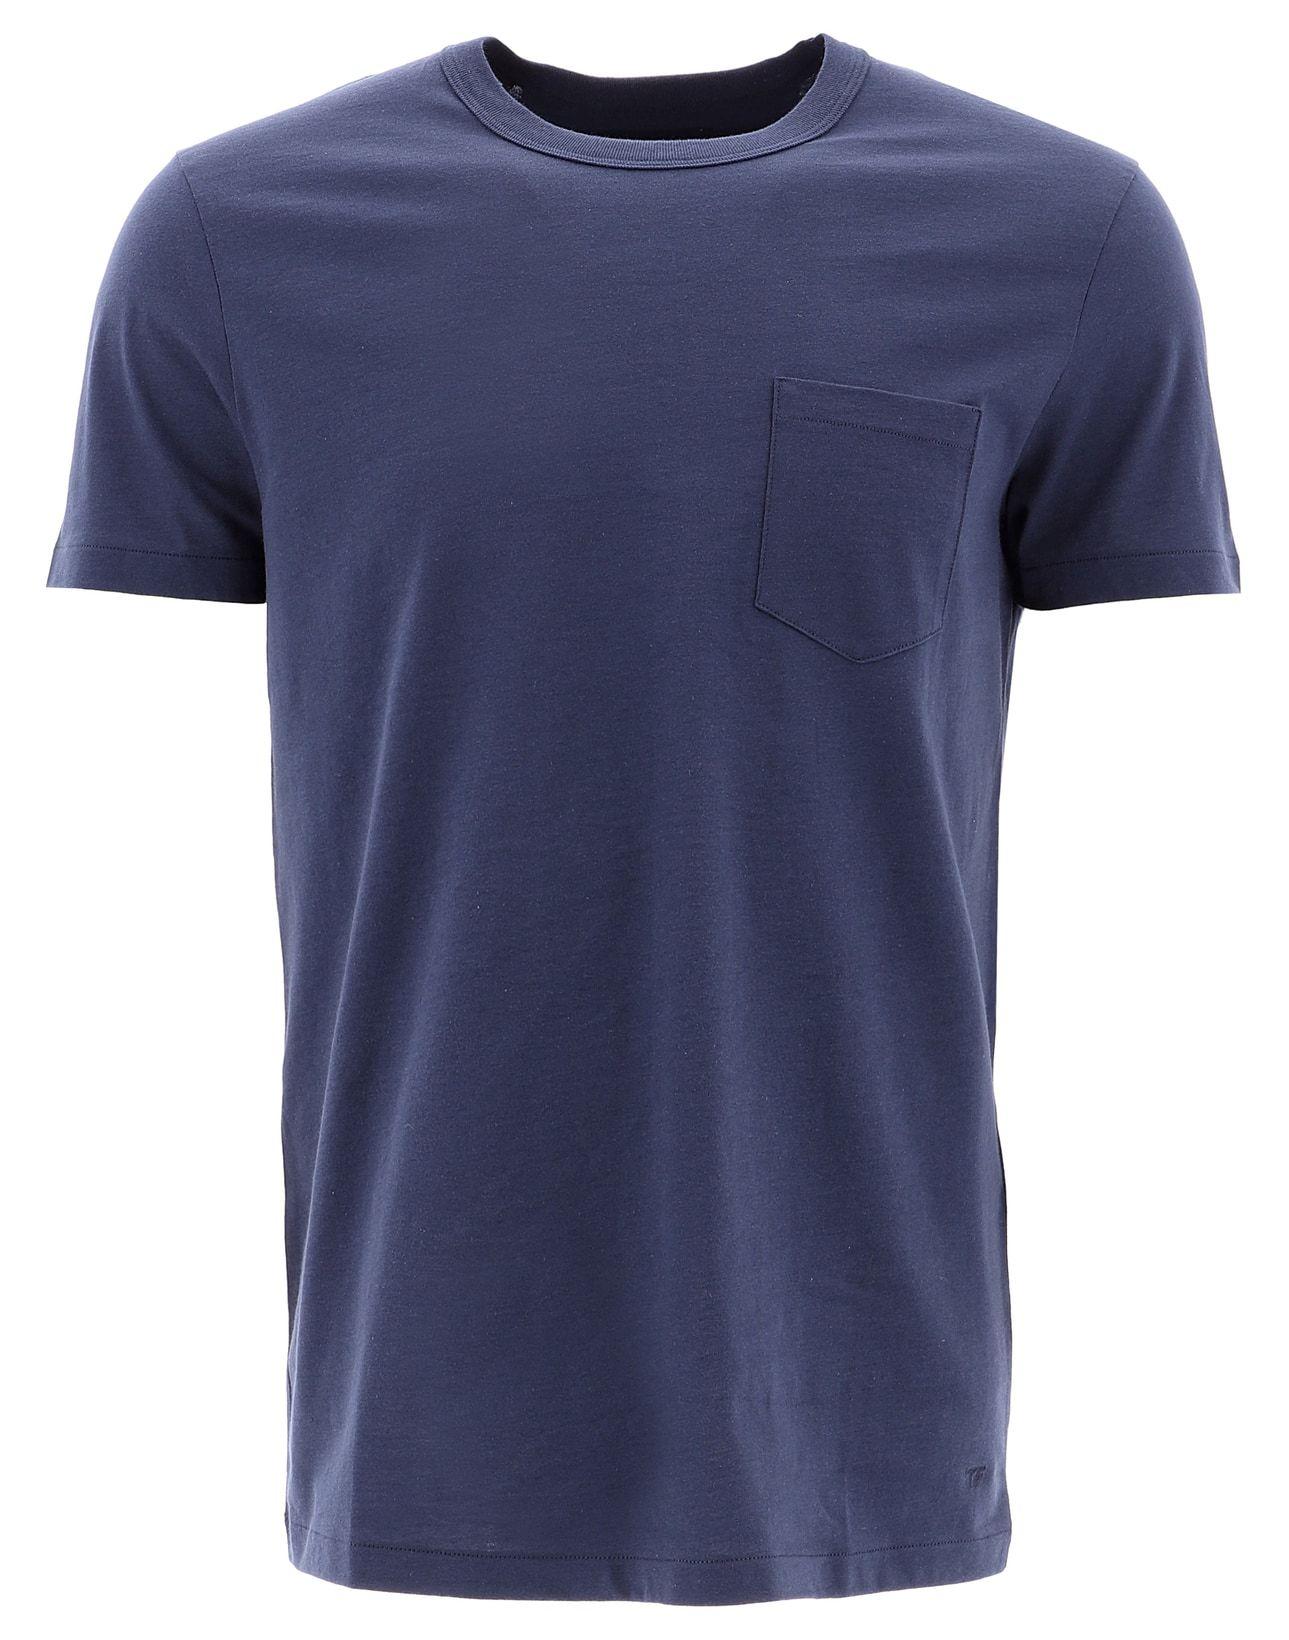 Tom Ford Blue Cotton T-shirt in Blue for Men - Lyst